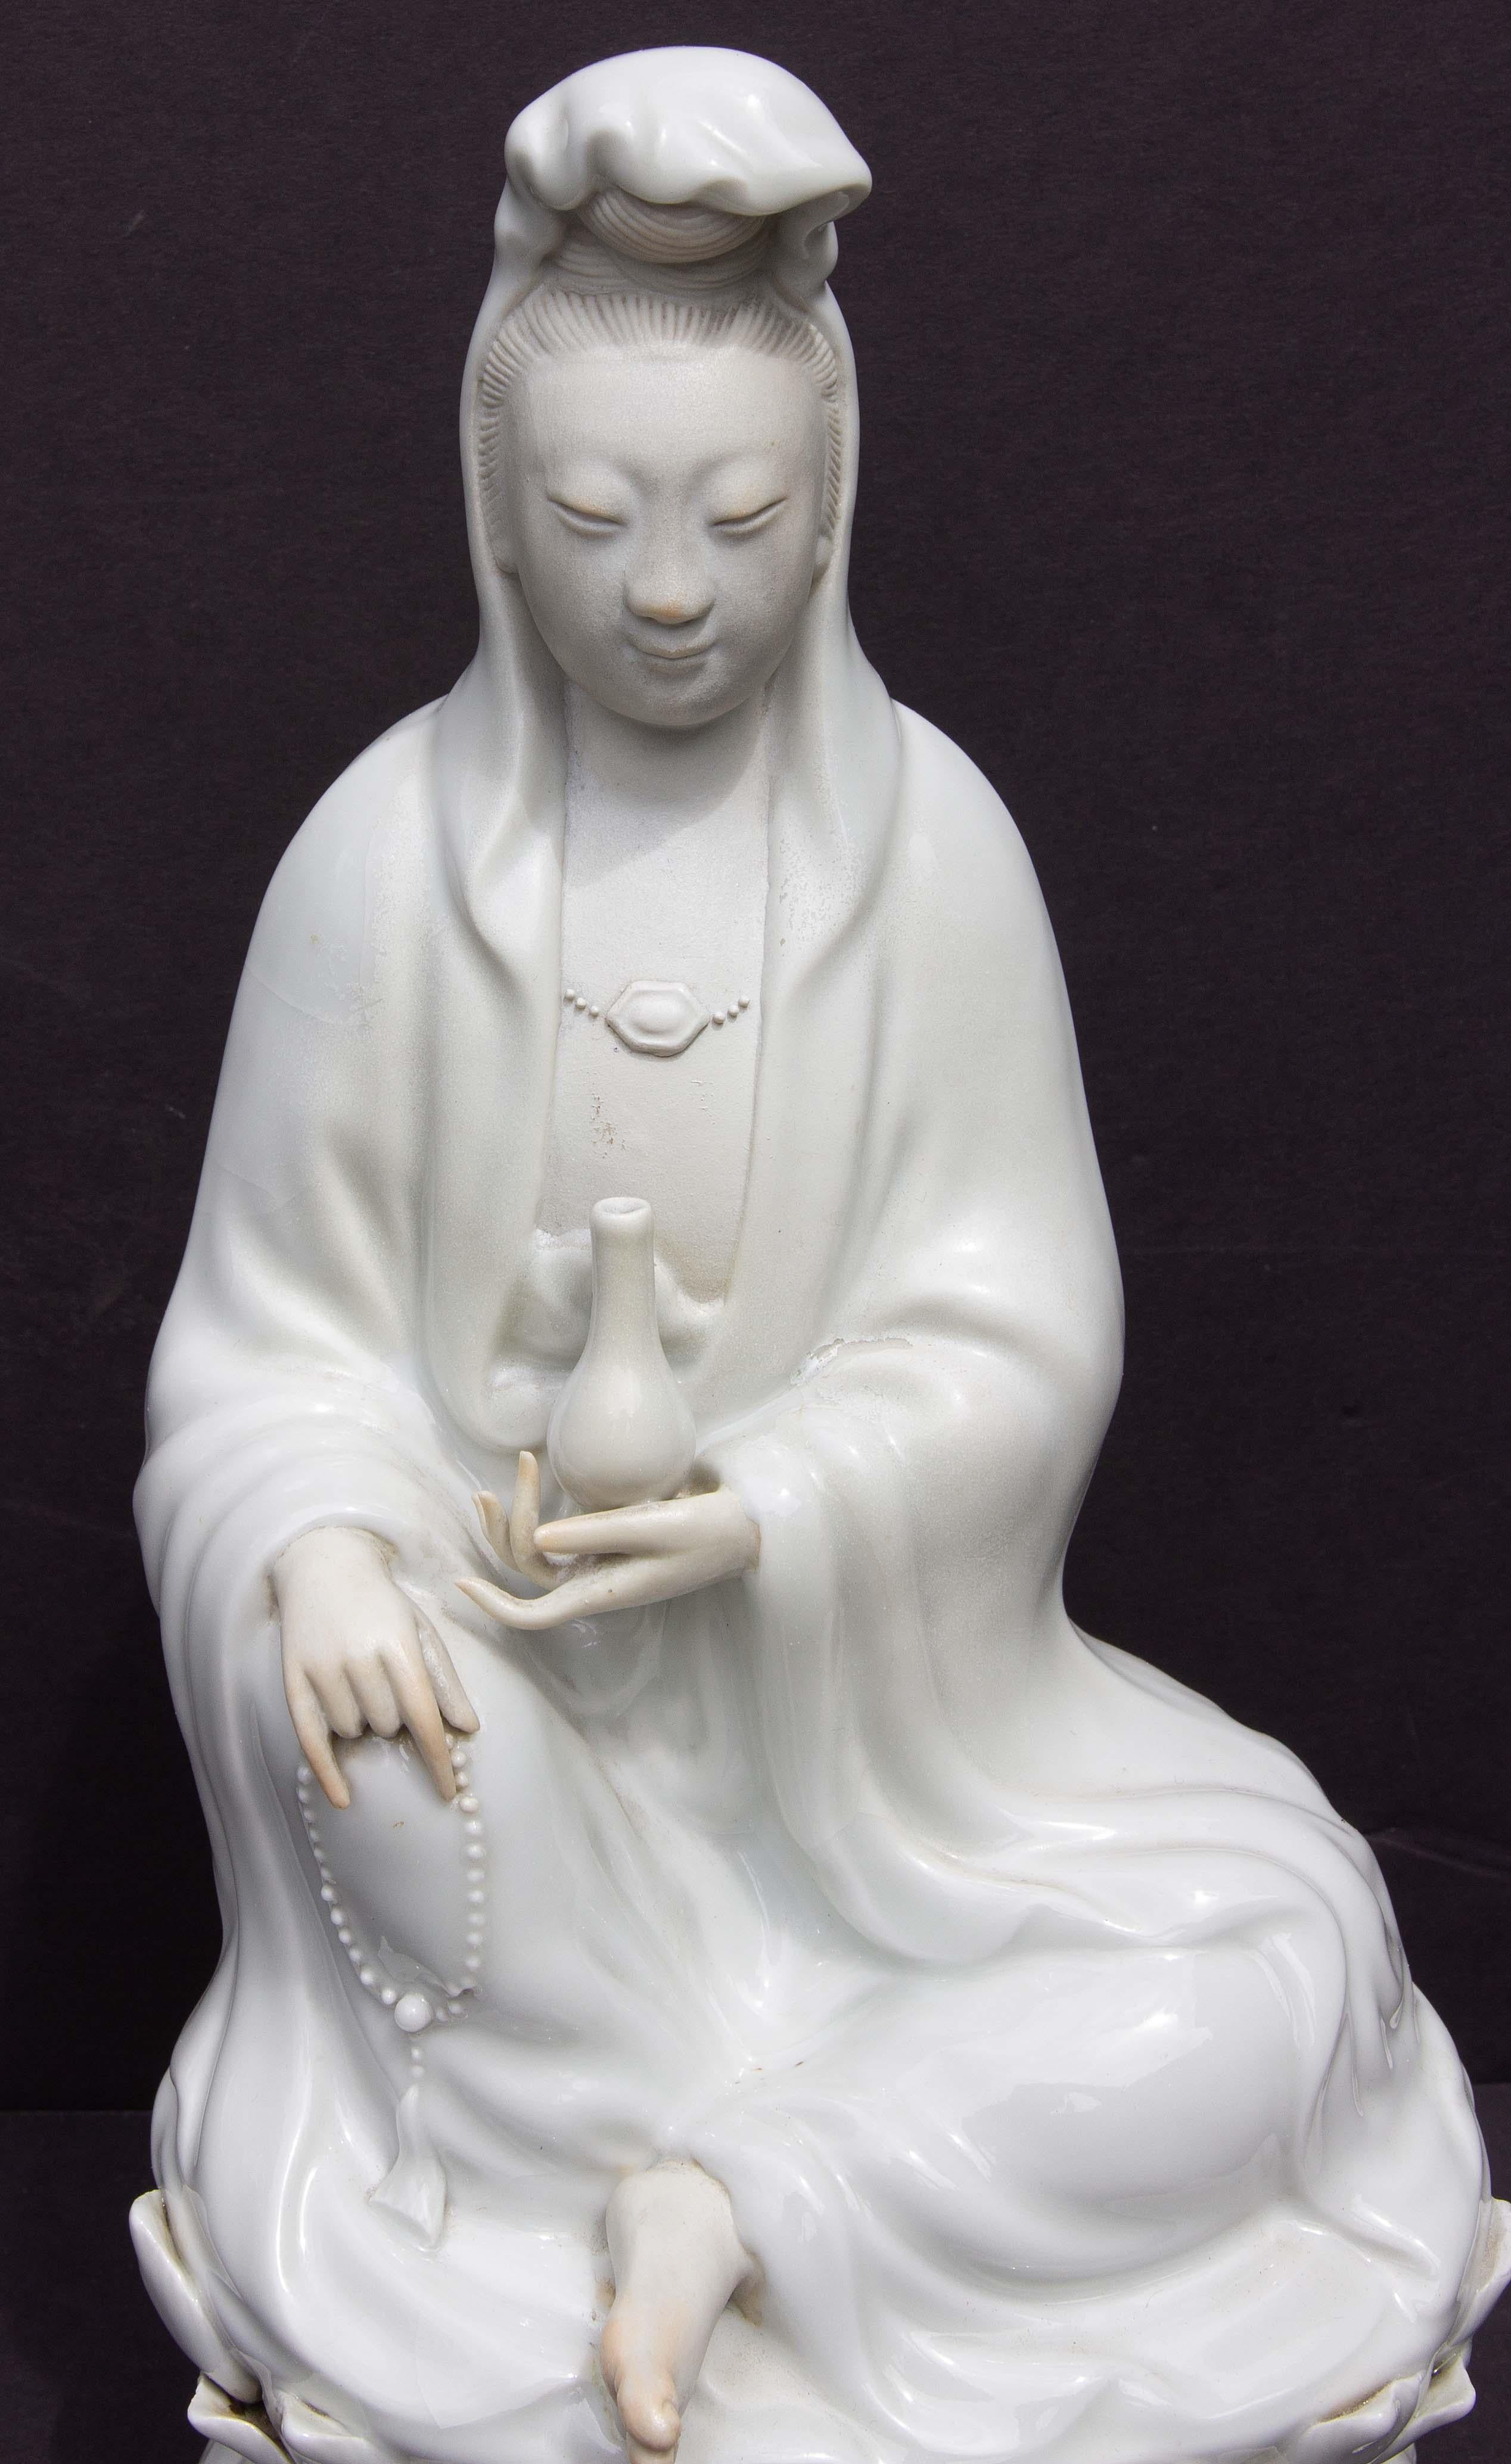 Blanc de chine porcelain figurine of Guanyin seated on a lotus flower. Excellent detail. Chinese. Mid 20th century.


Blanc de chine porcelain figurine of Guanyin seated on a lotus flower. Excellent detail. Chinese. Mid 20th